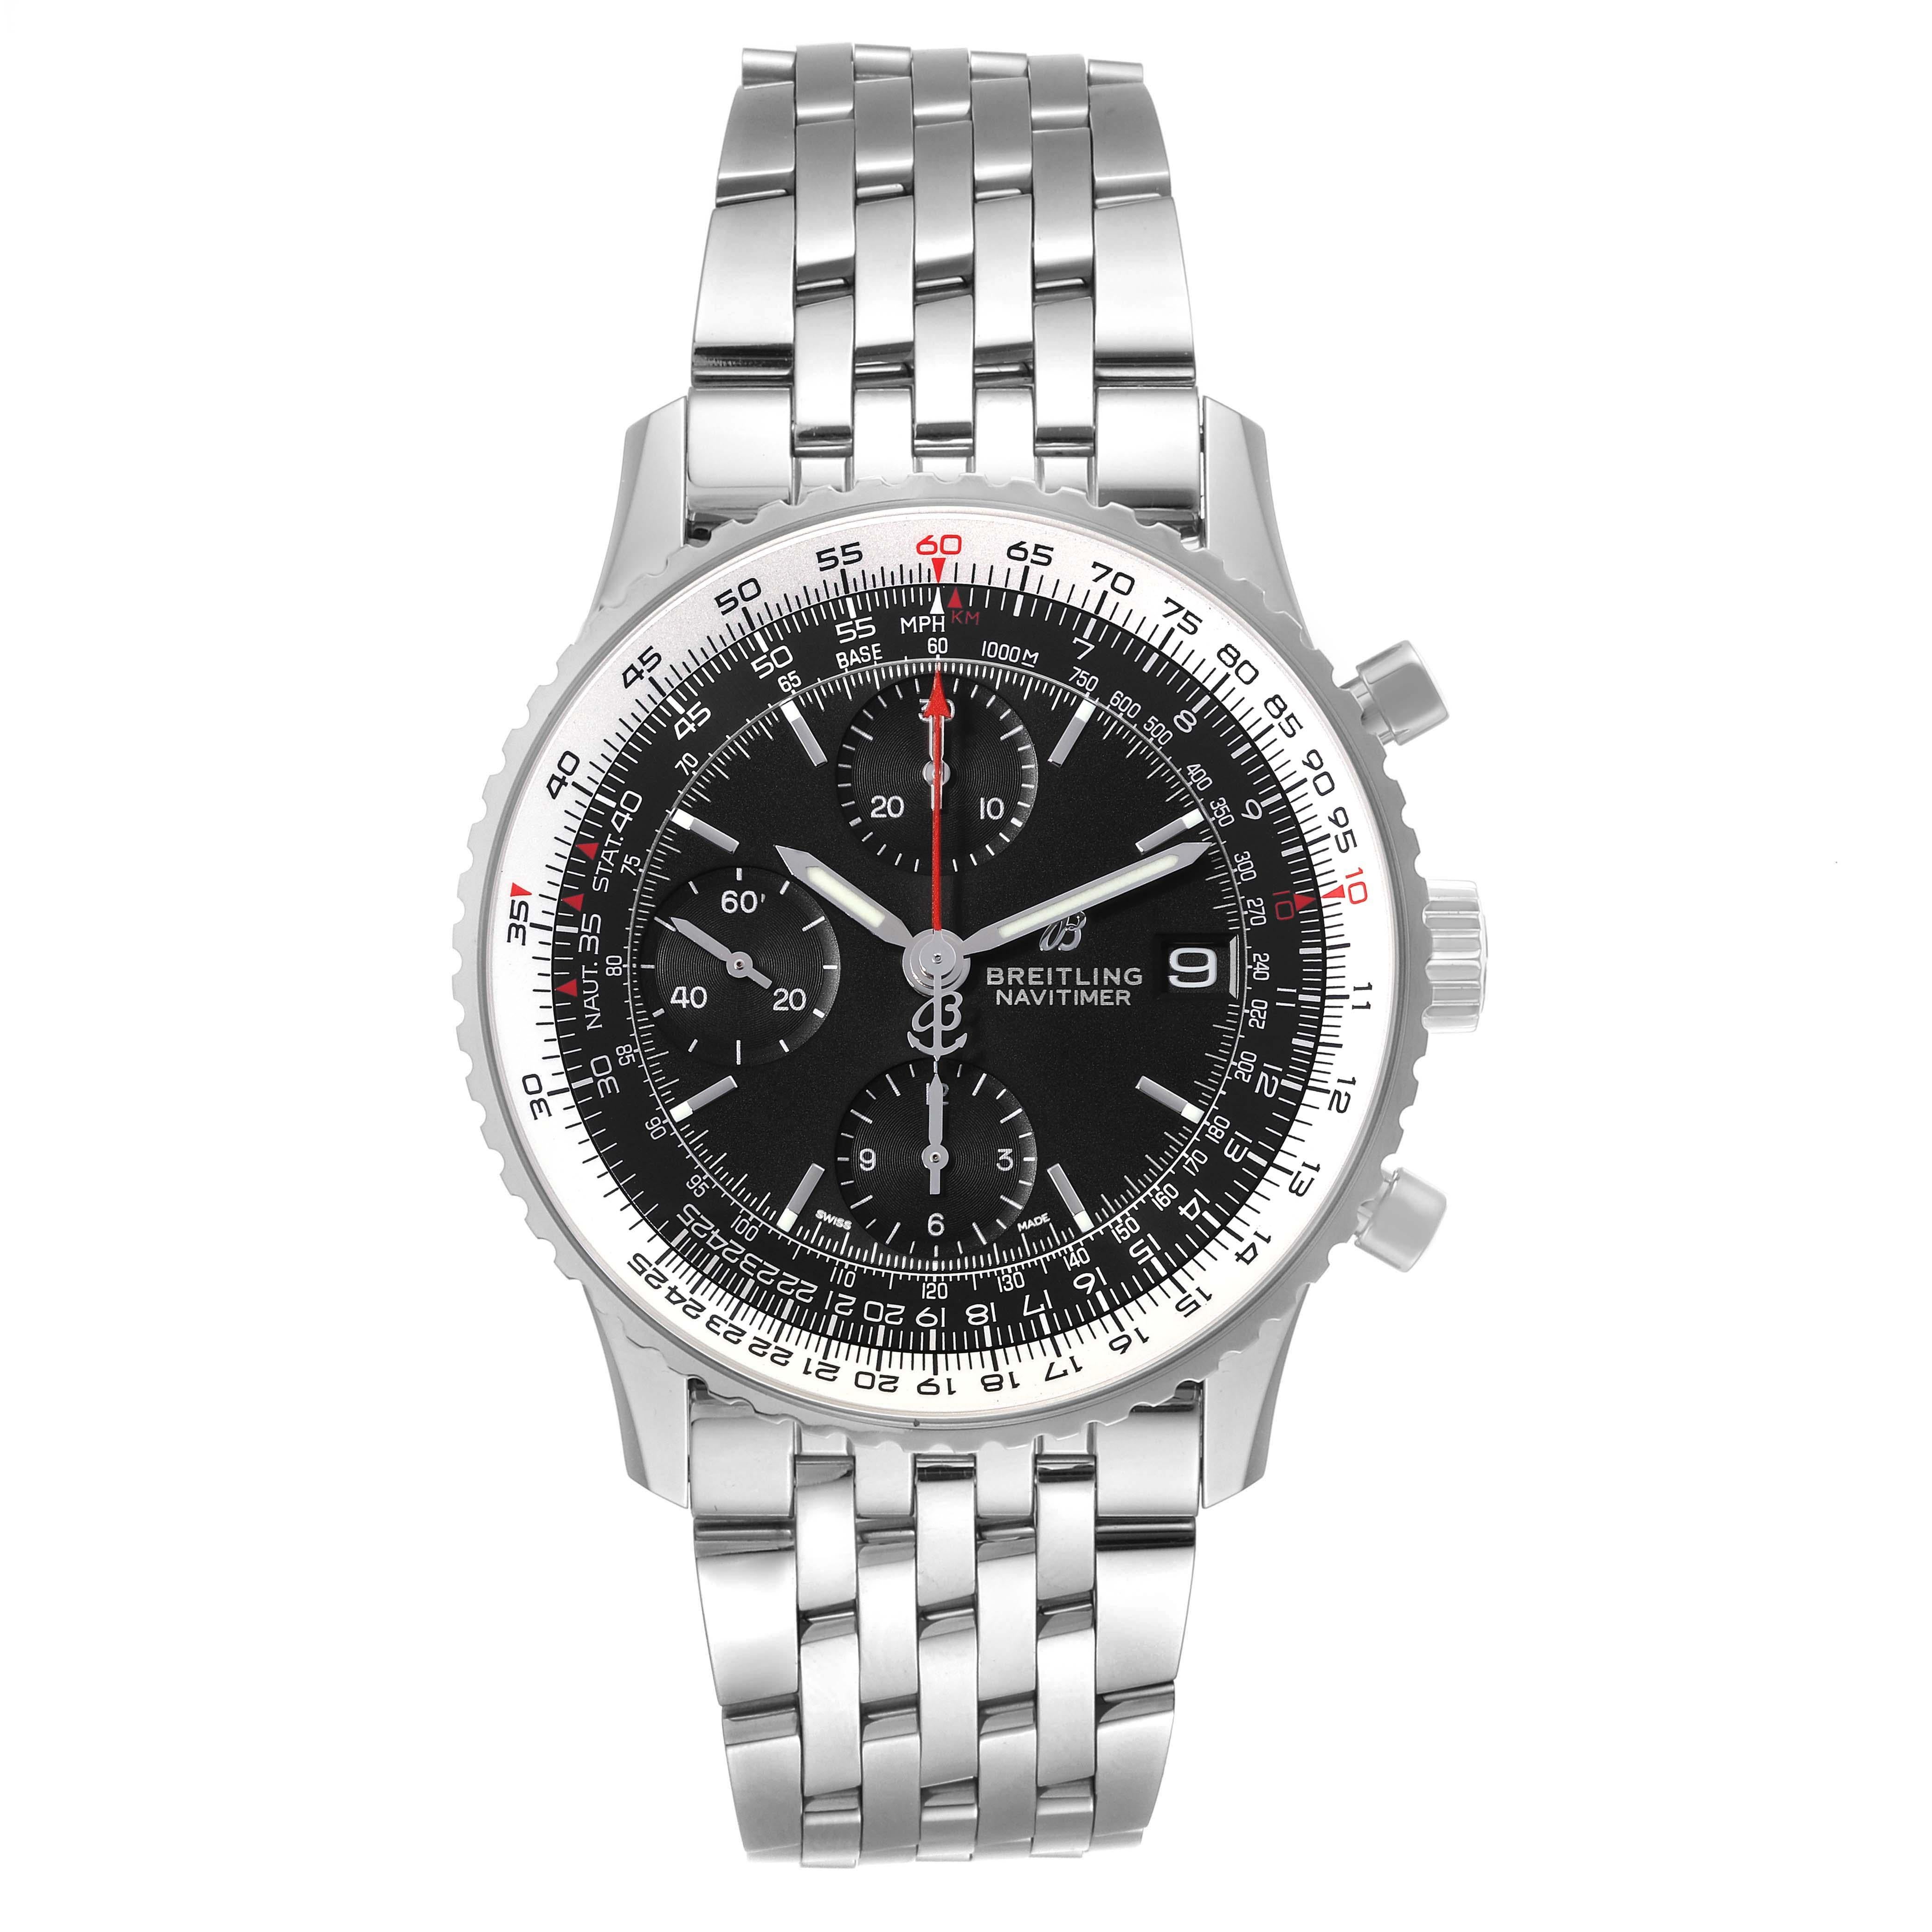 Breitling Navitimer Heritage Black Dial Steel Mens Watch A13324 Box Card. Automatic self-winding officially certified chronometer movement. Chronograph function. Stainless steel case 42.0 mm in diameter. Stainless steel crown and pushers. Stainless